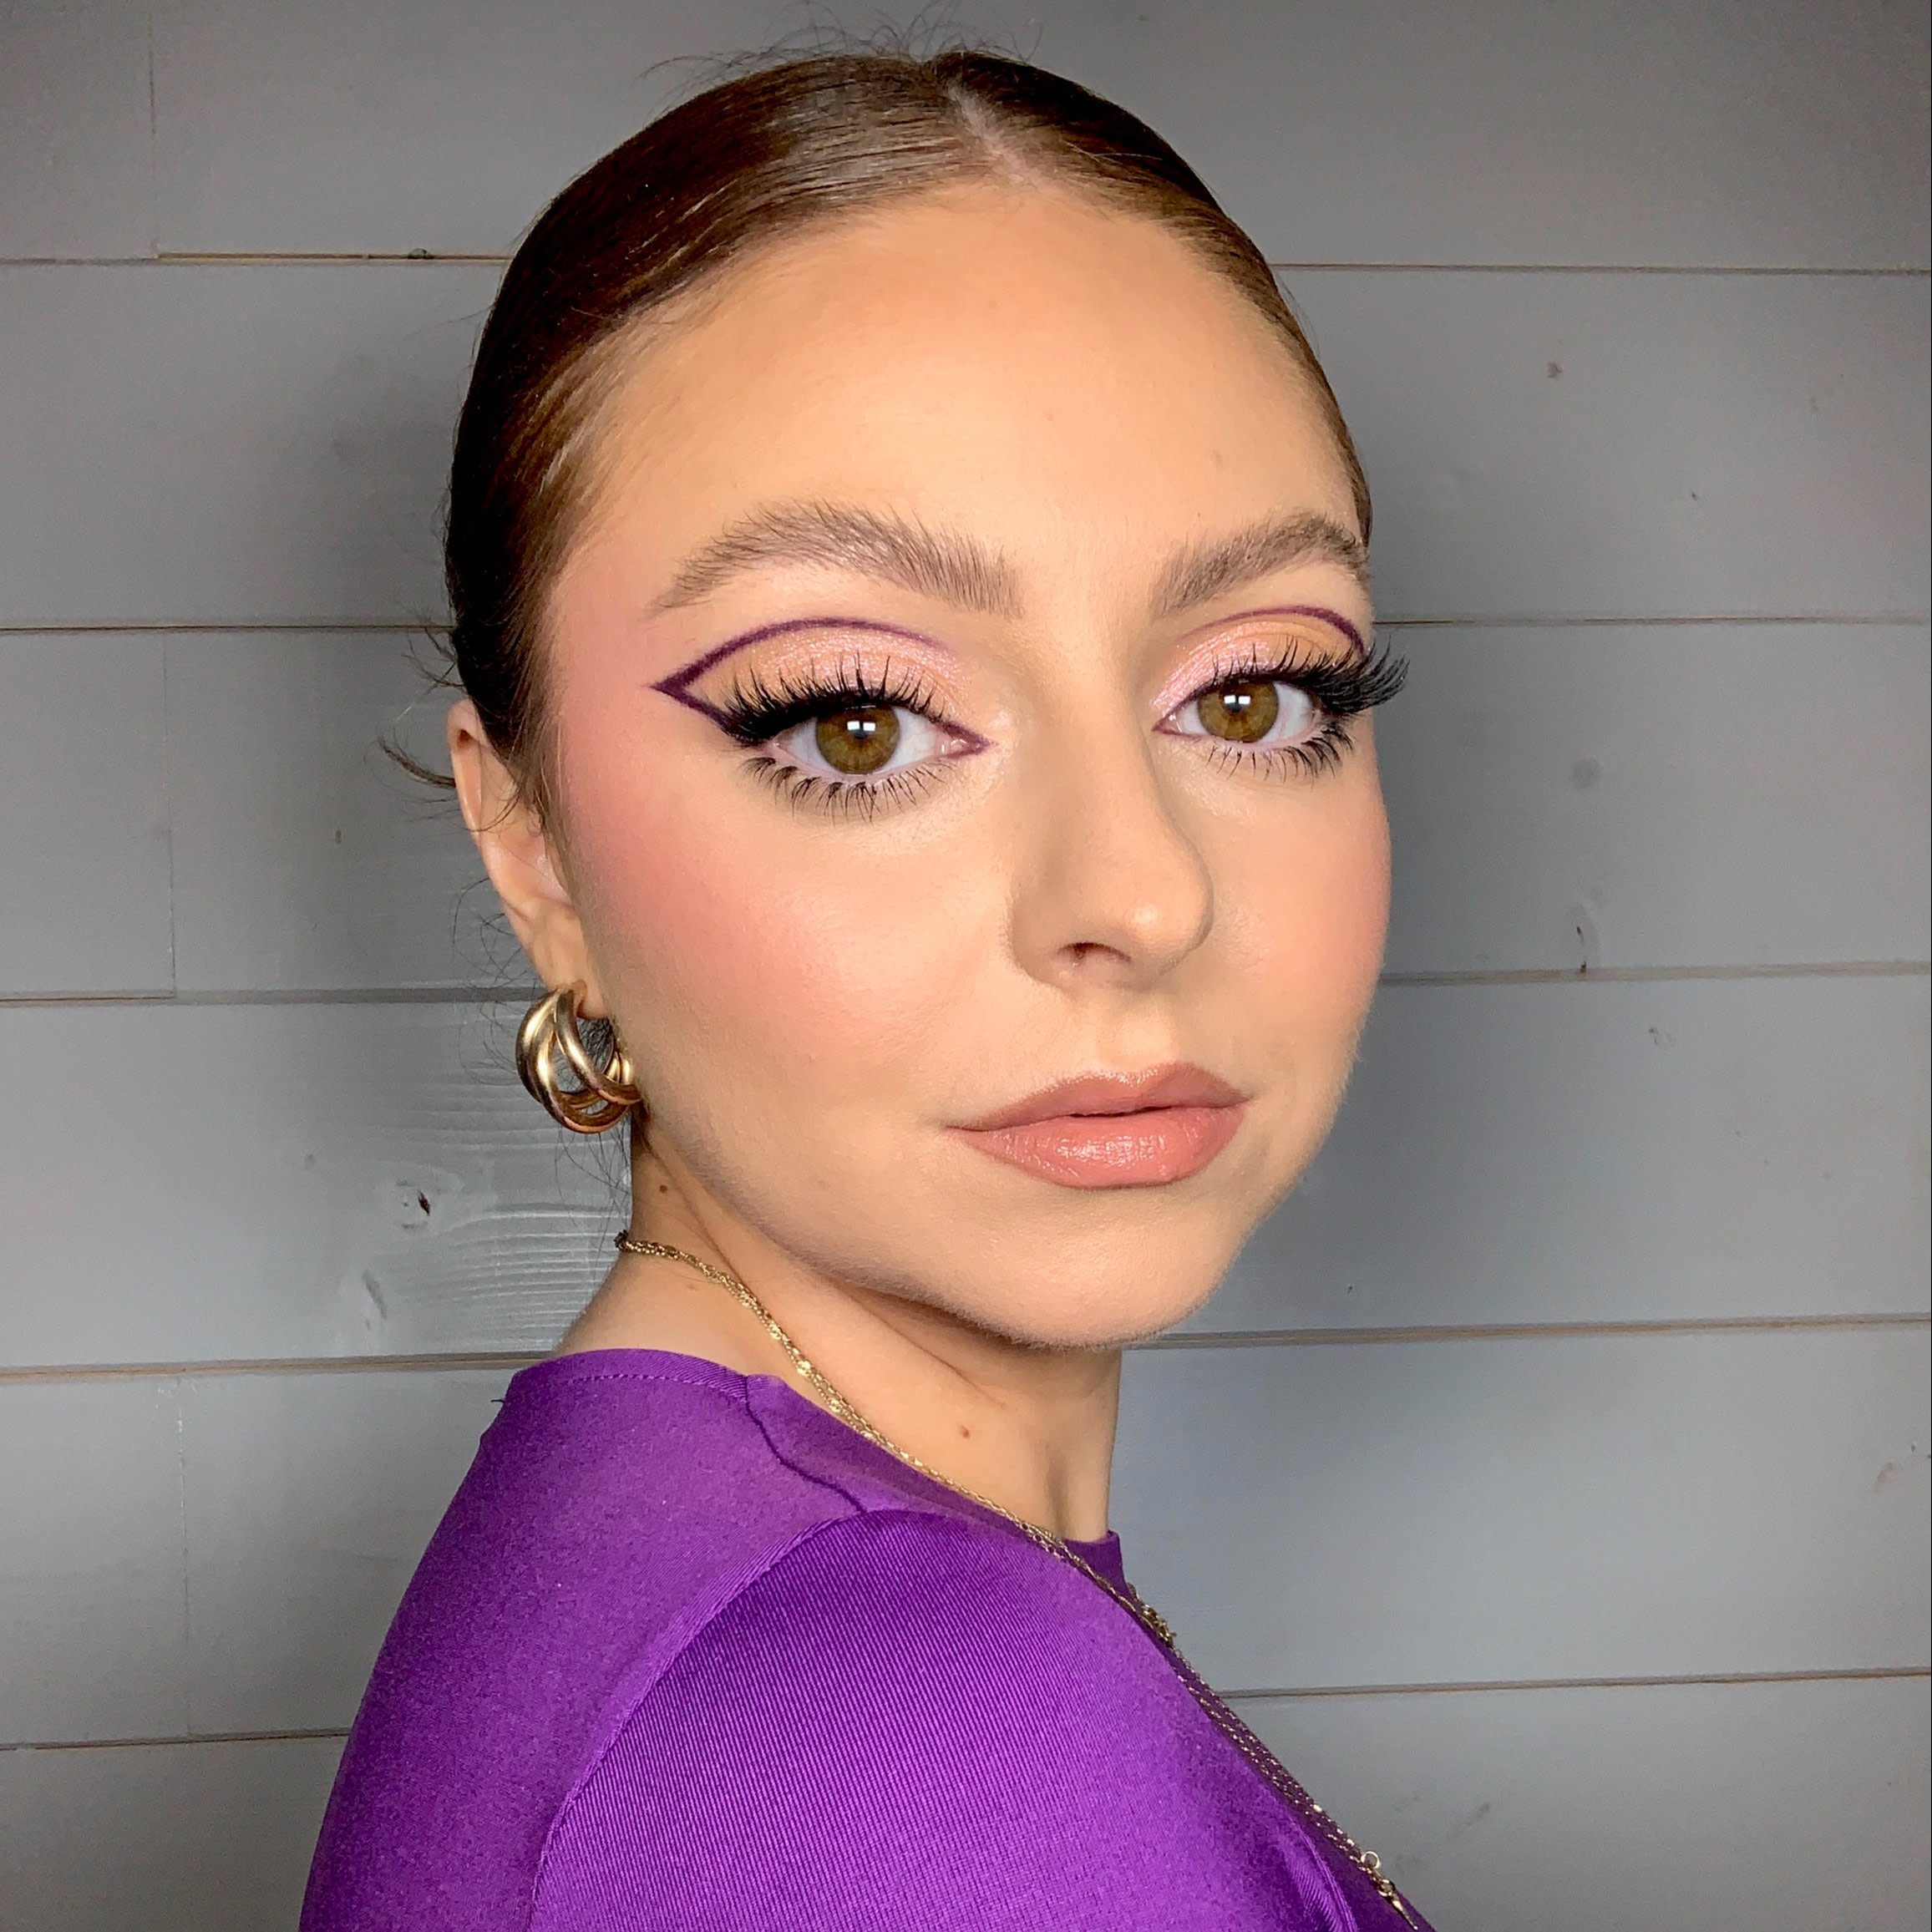 Light-tone model with brown eyes wearing soft pinkish-beige eyeshadow with black eyeliner and glitter purple eyeliner bordering her eyelid for a dramatic purple eye look.